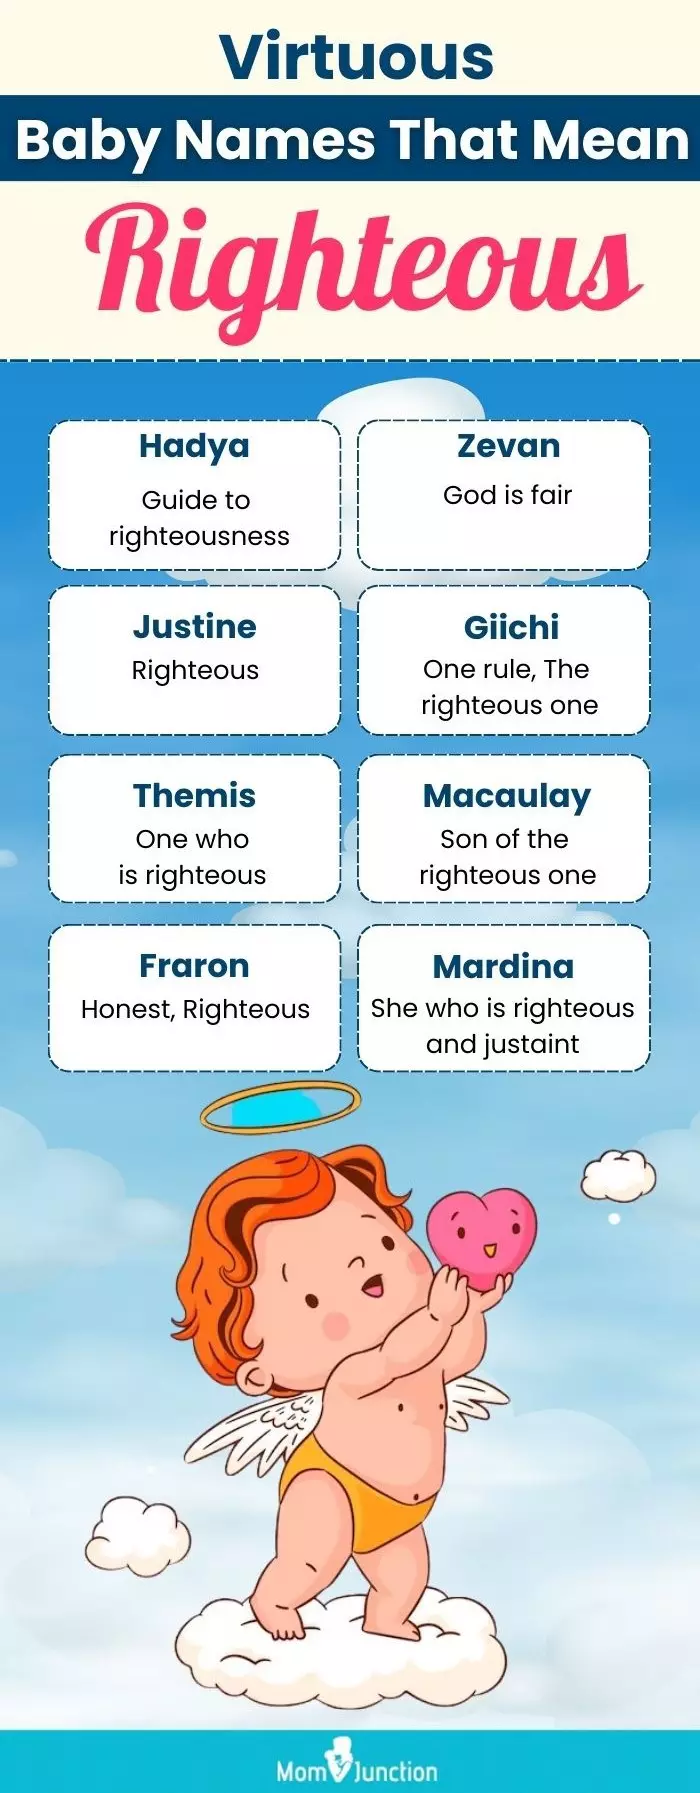 virtuous baby names that mean righteous (infographic)